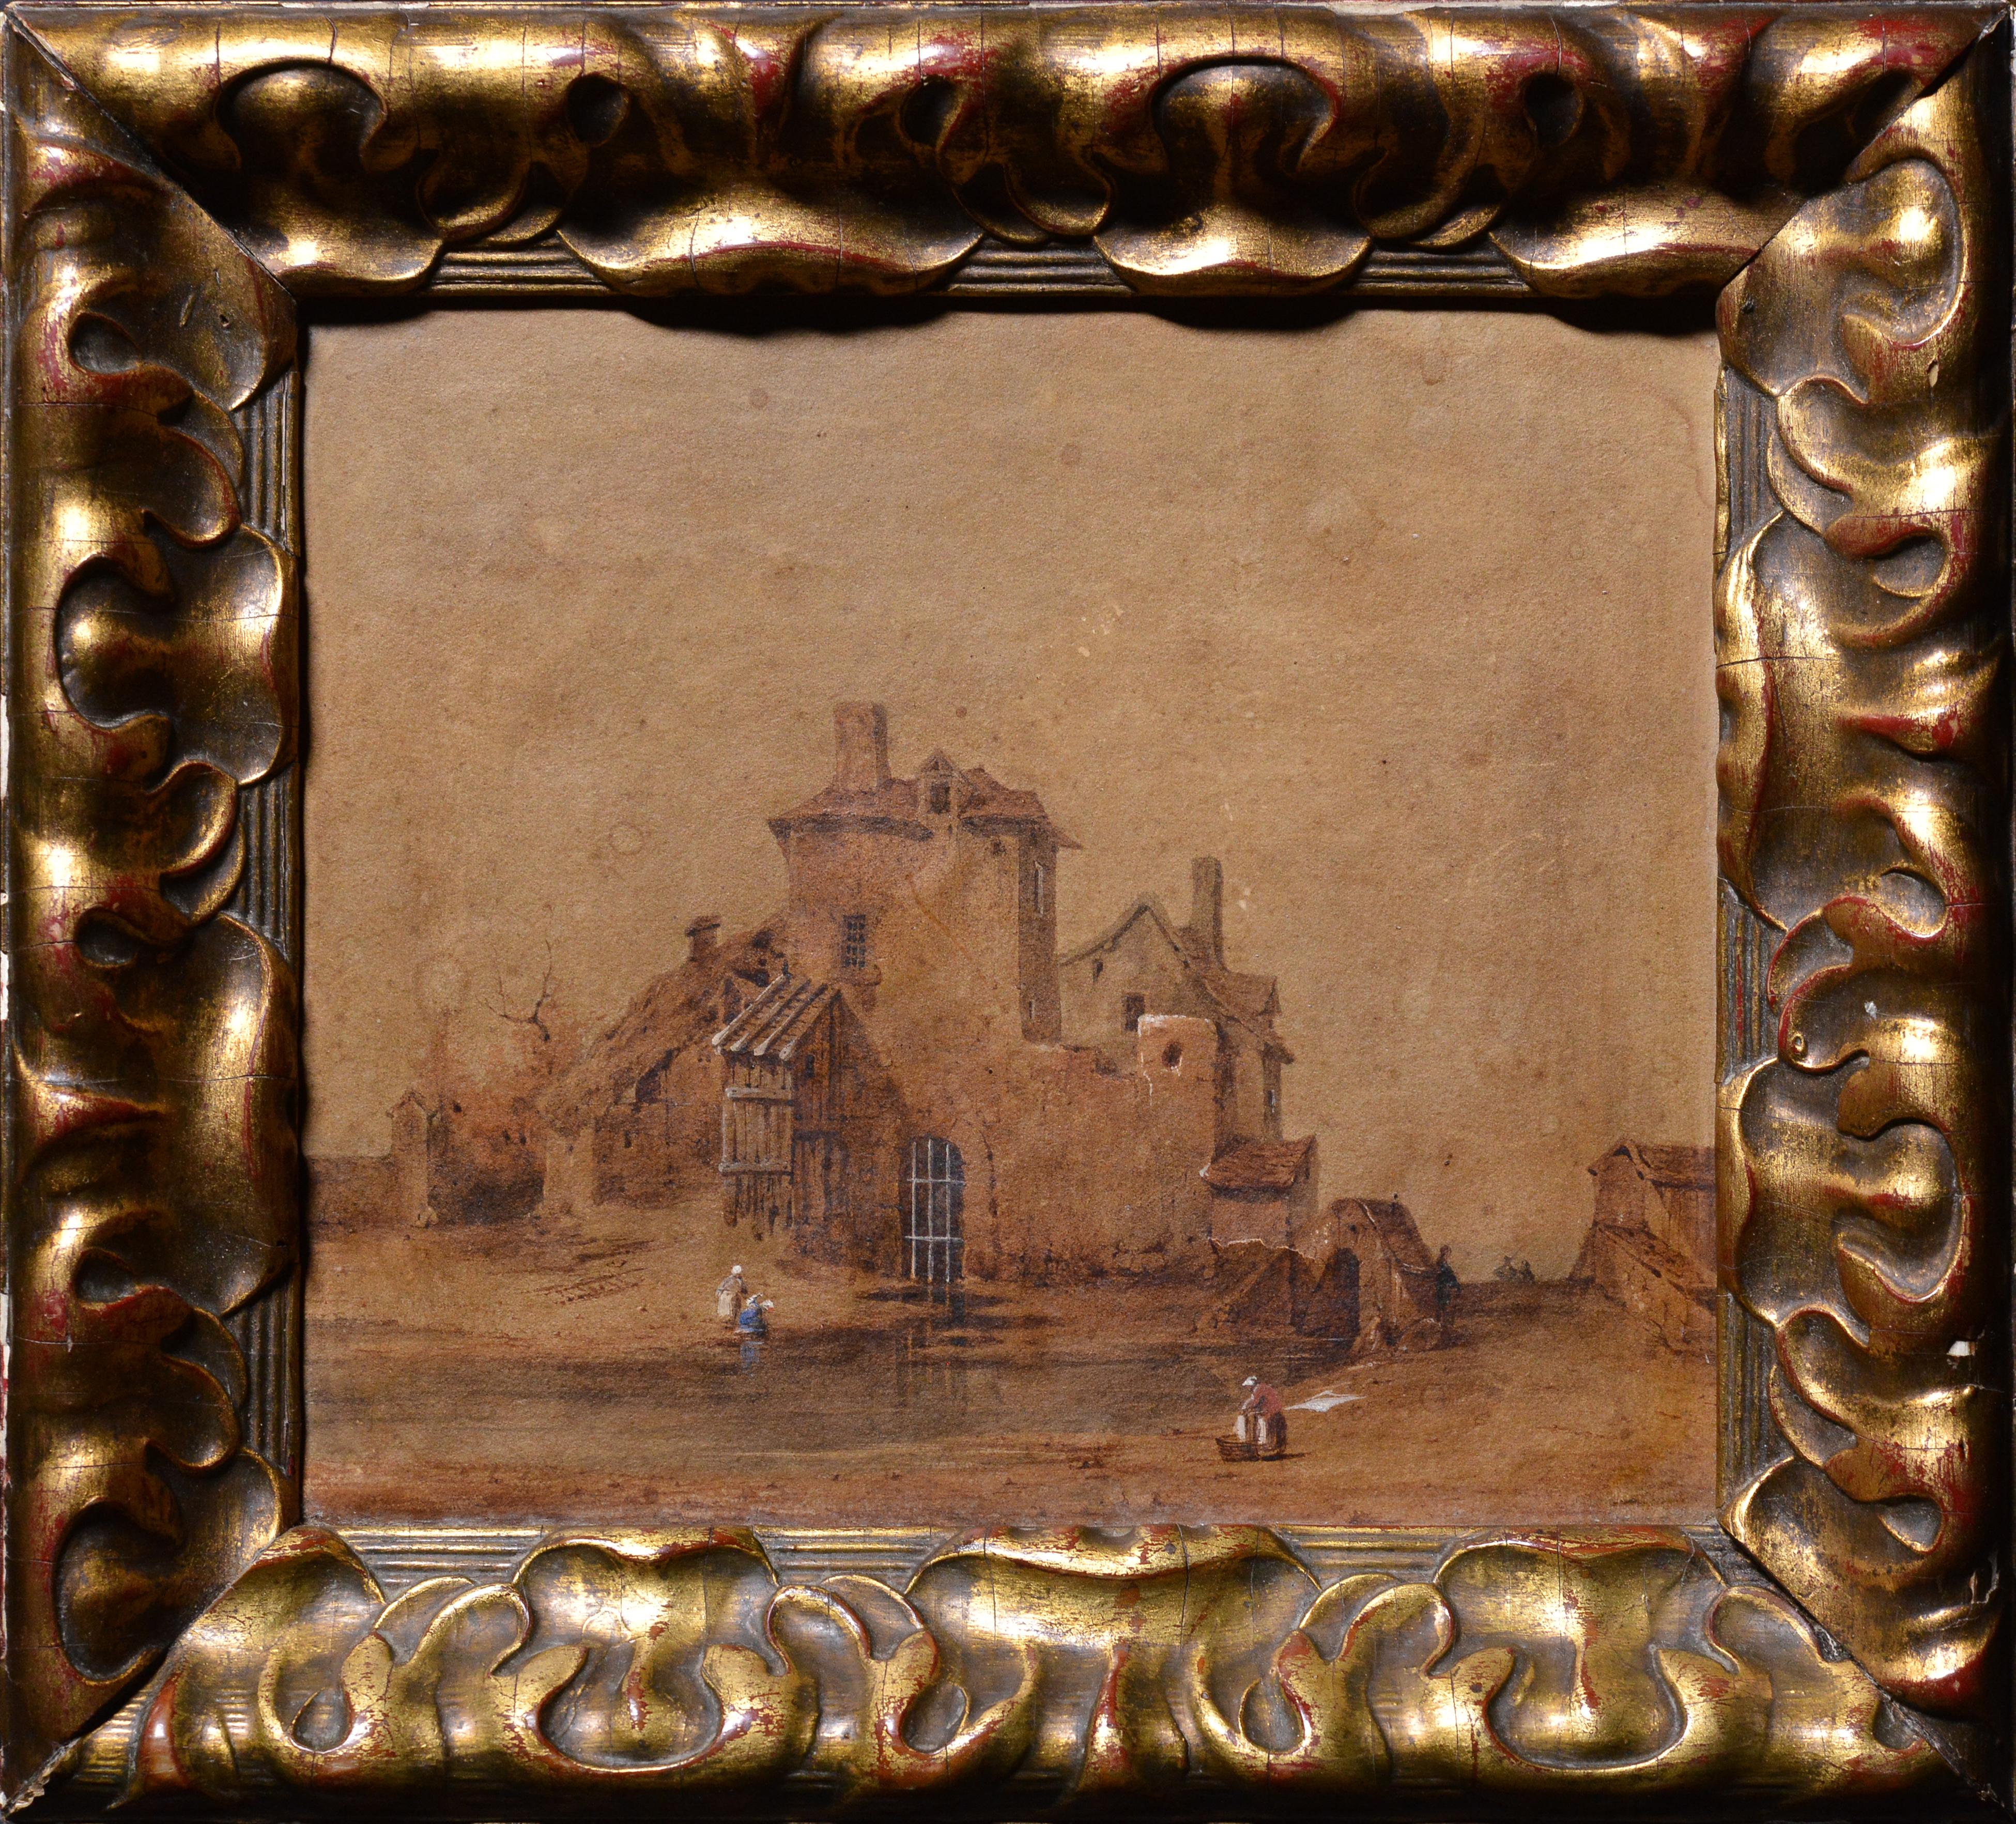 Unknown Landscape Painting - Baroque Oil Grisaille Painting on Paper by Old Master late 17th century